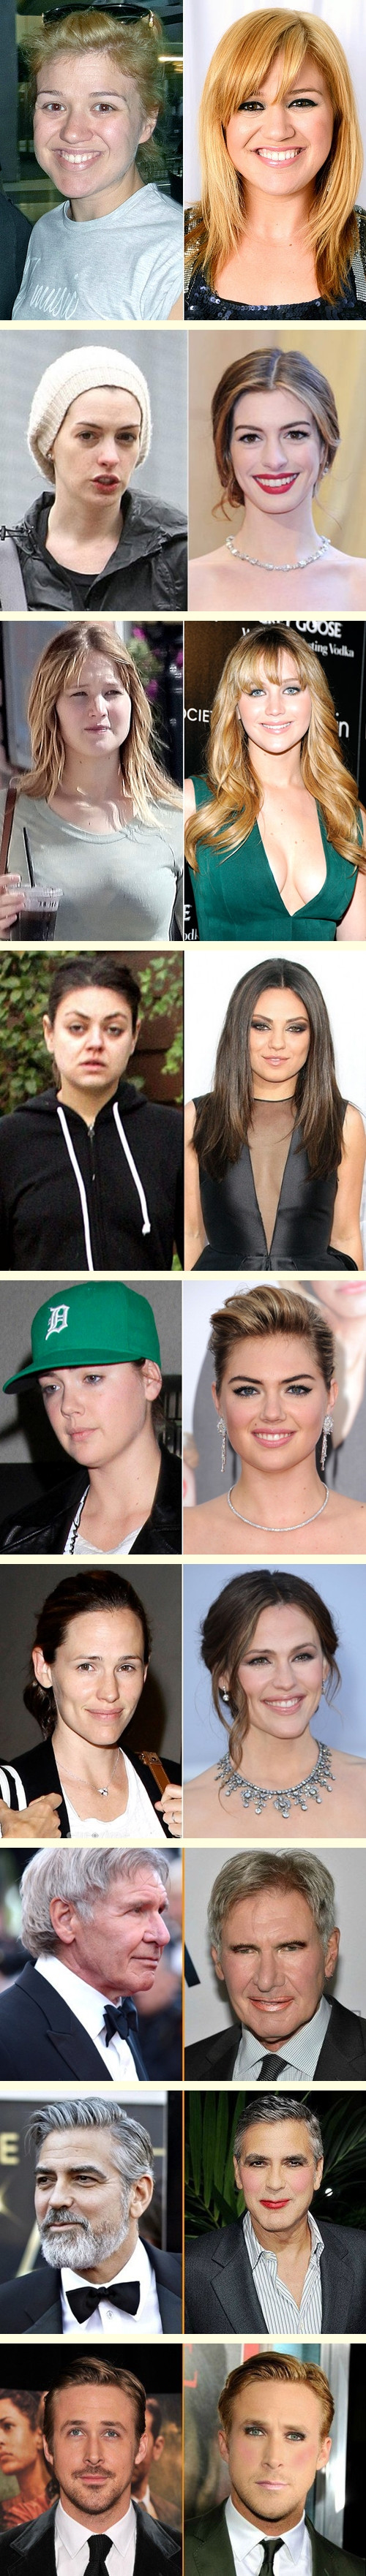 Celebrities without make up